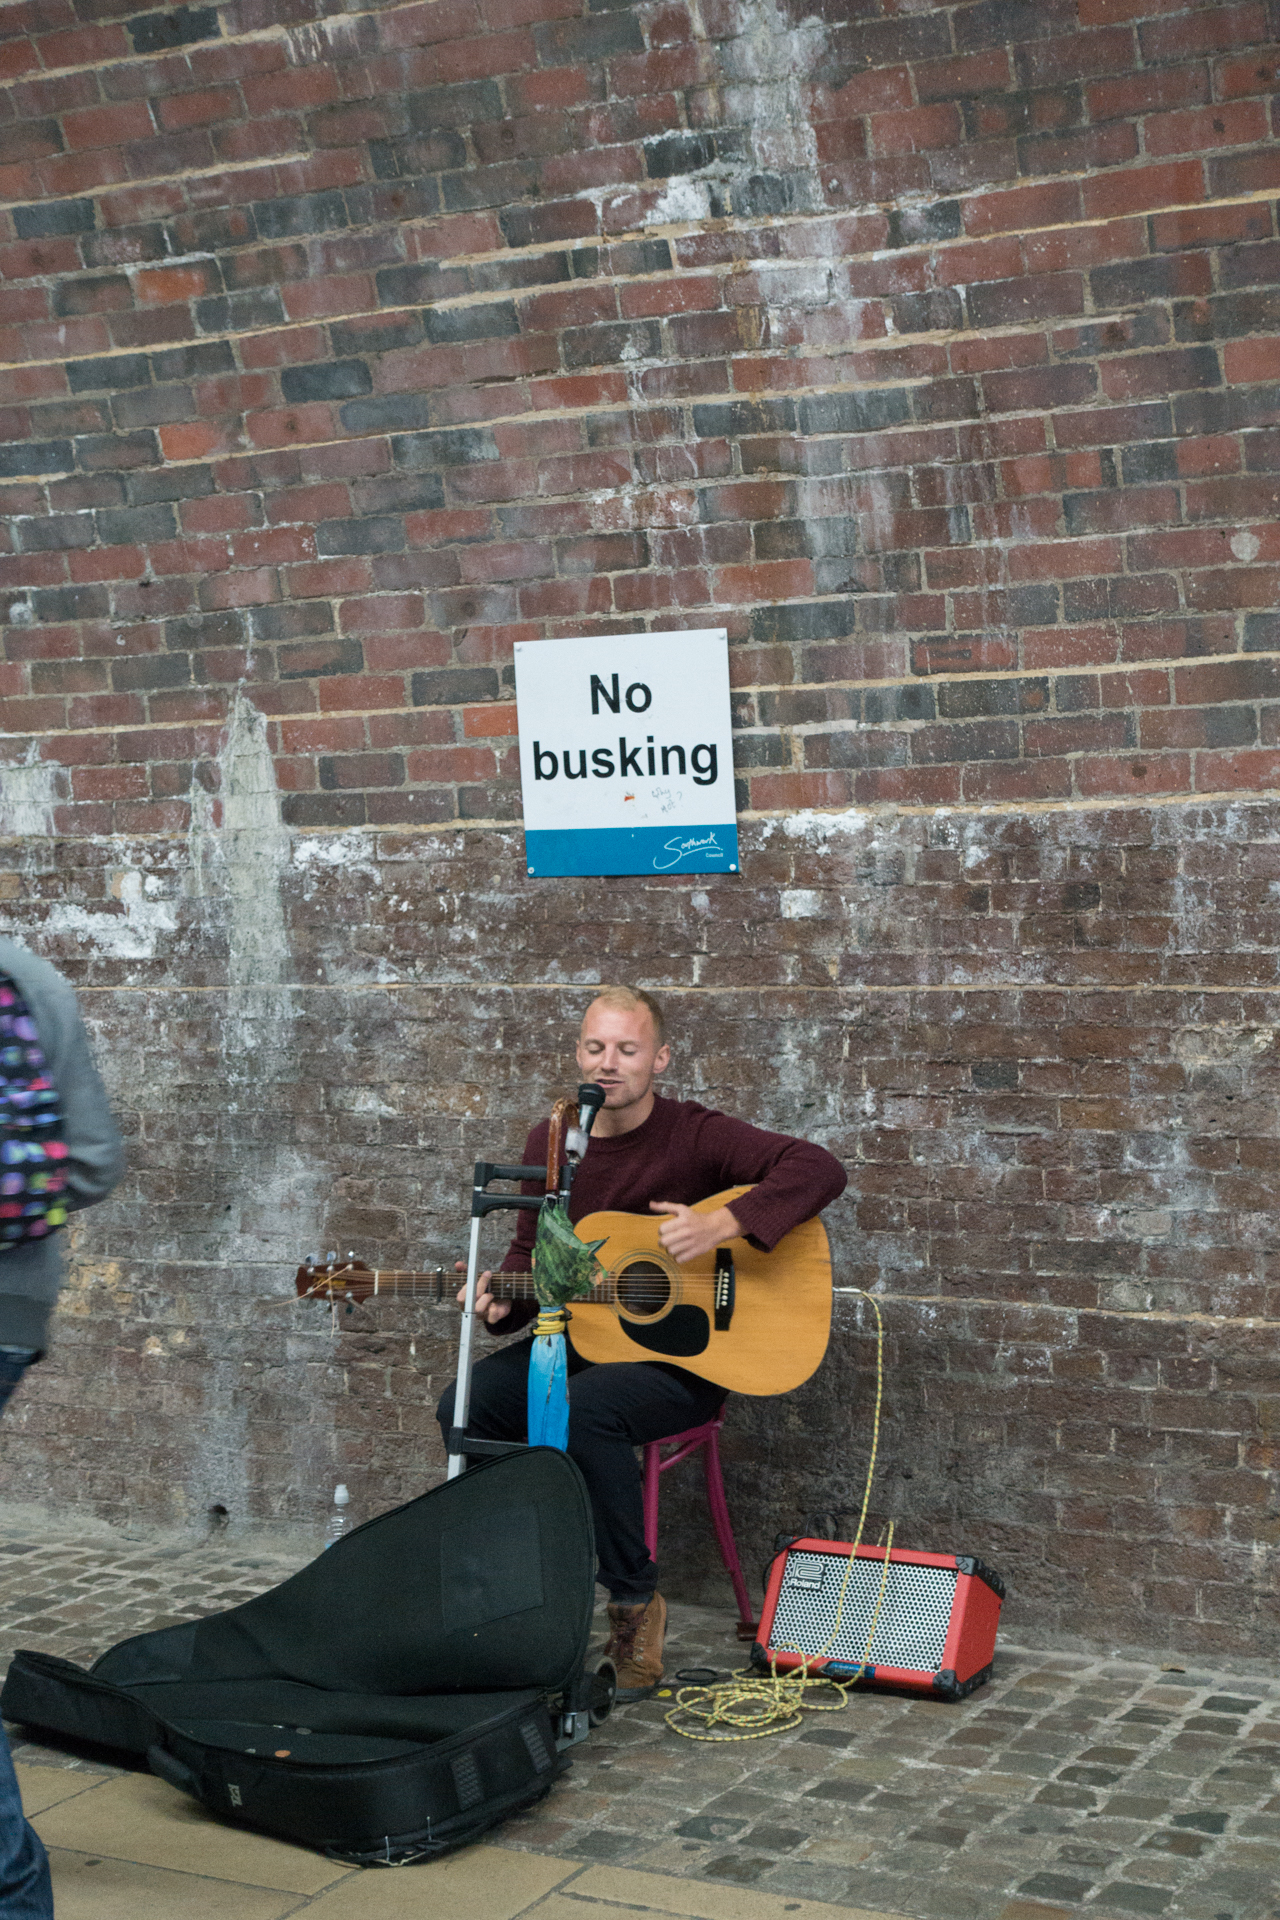 a man is playing an acoustic guitar on the sidewalk